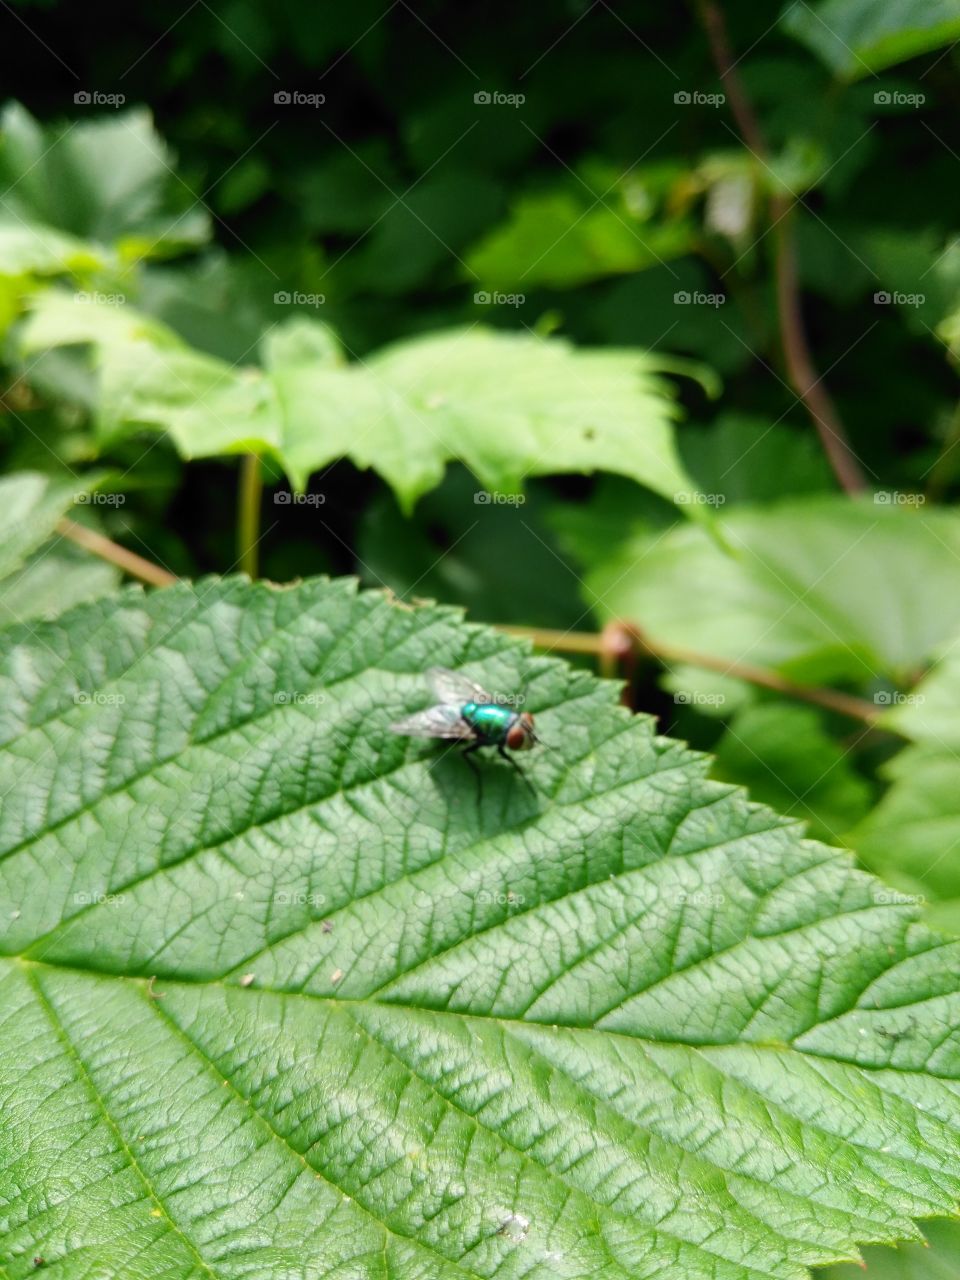 Greenbottle fly.  I was surprised I was able to get that close to it without it taking off.